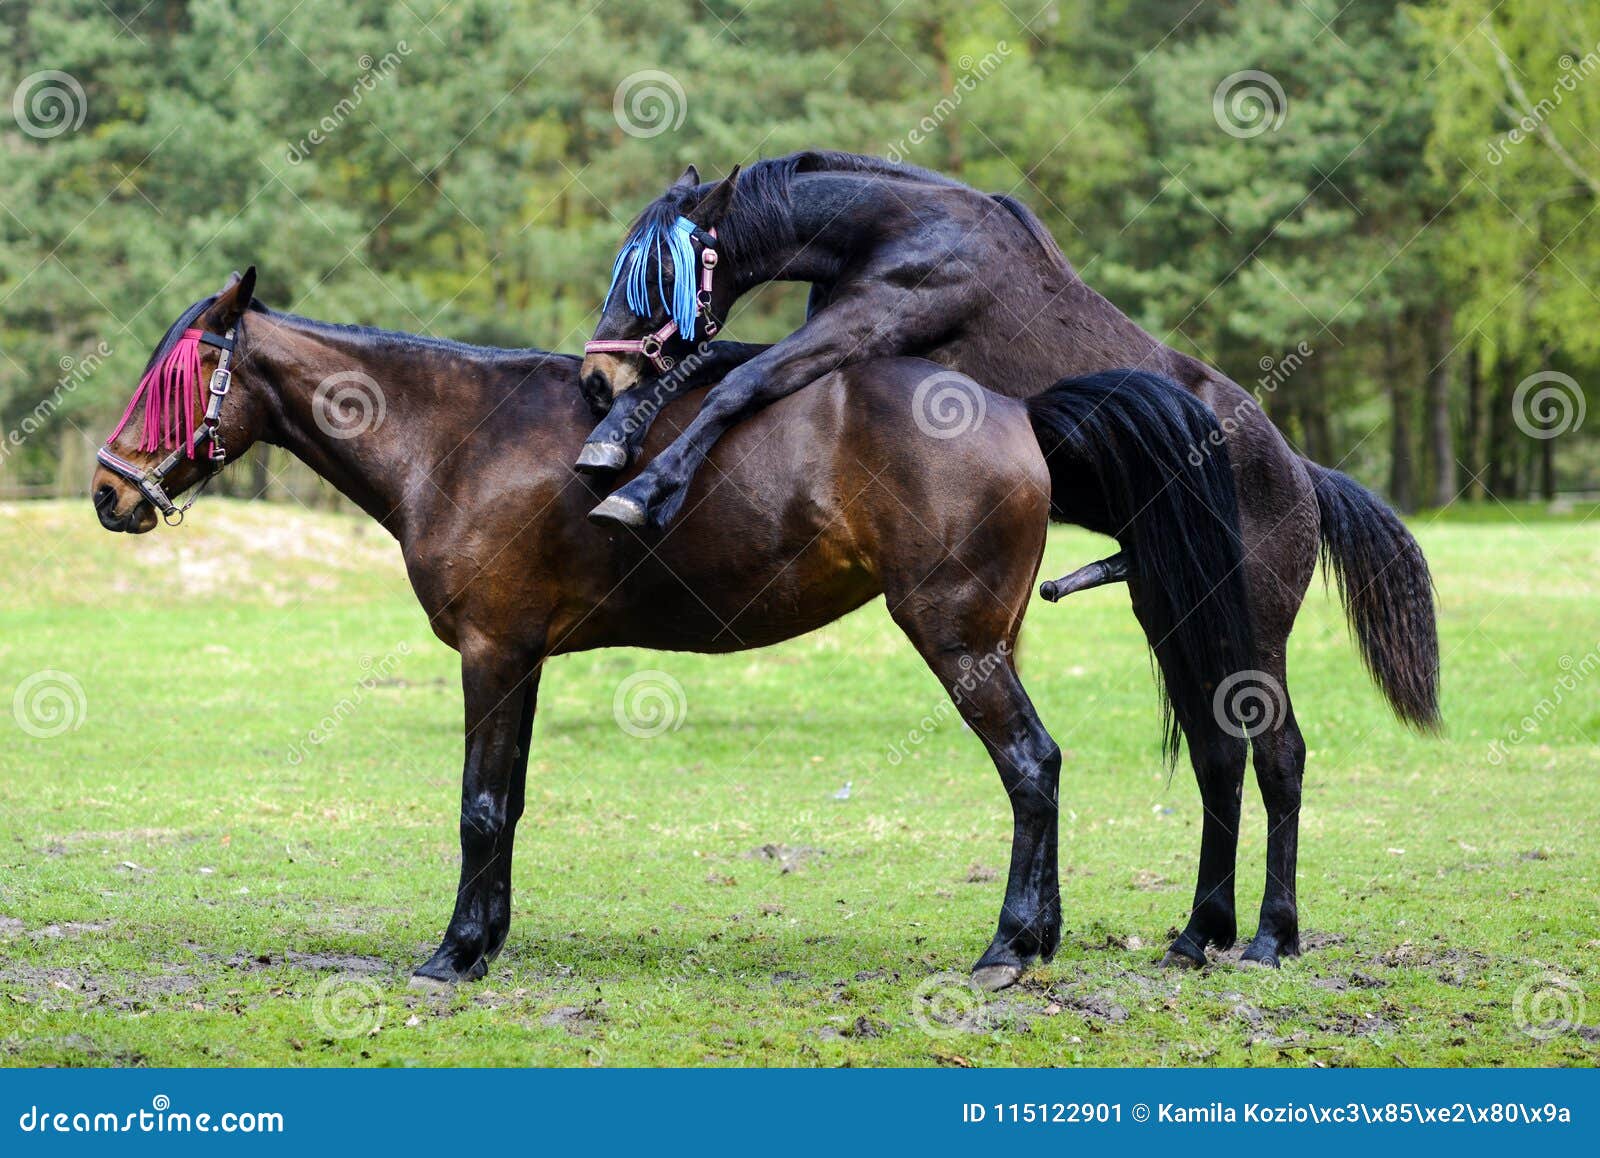 Horse Sex Porn Intercores - Horses Having Sex on the Meadow. Stock Image - Image of animal, nature:  115122901